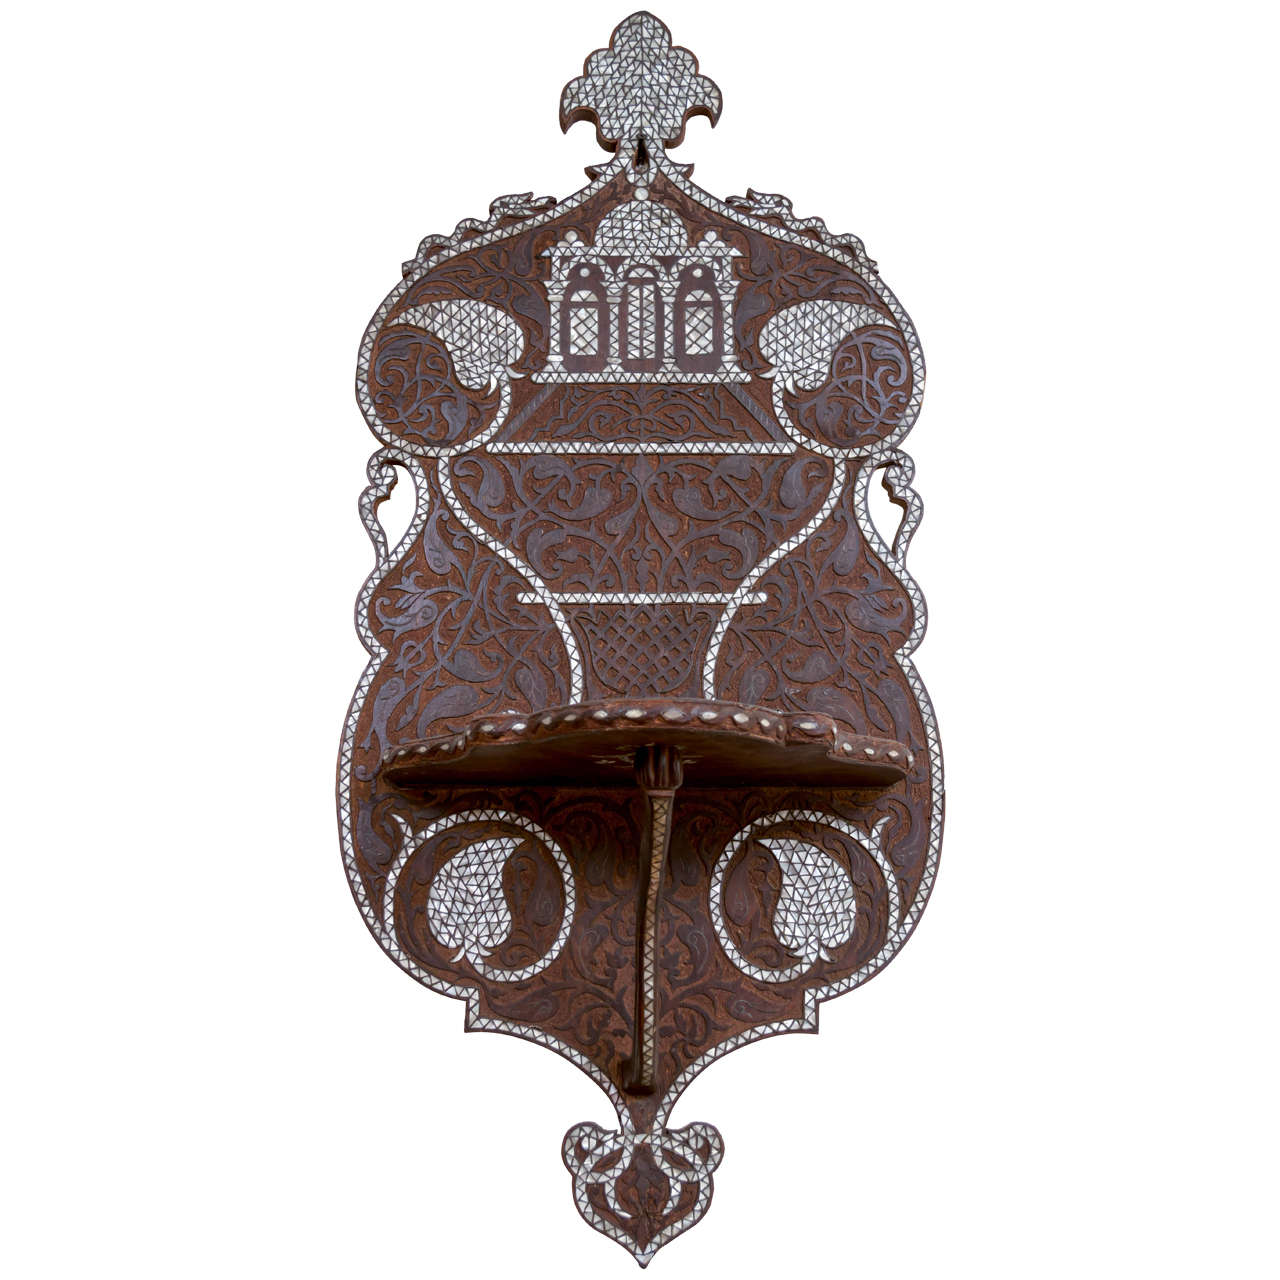 19th Century Anglo-Indian Wall Shelf